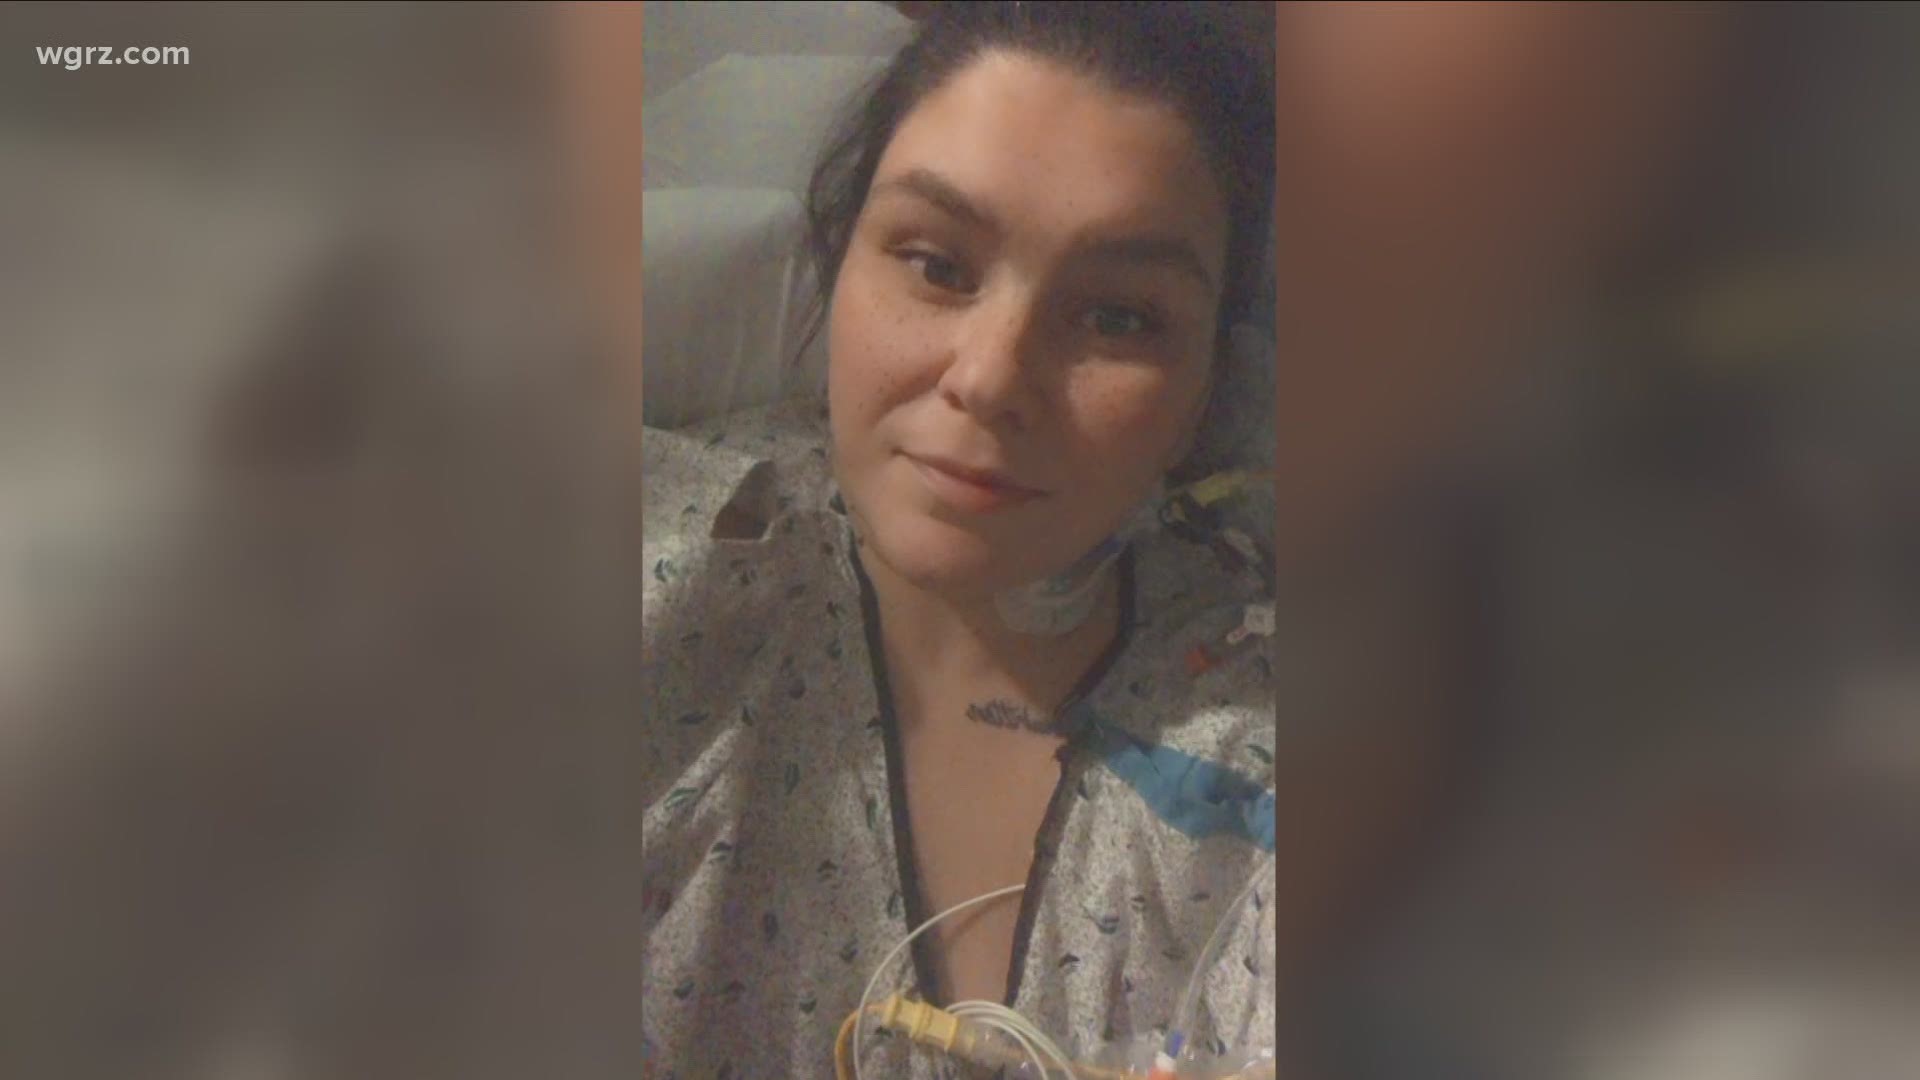 34-year-old Kristen Jarosz was diagnosed with congestive heart failure seven years ago. A mechanical pump in her chest helps her heart pump blood.